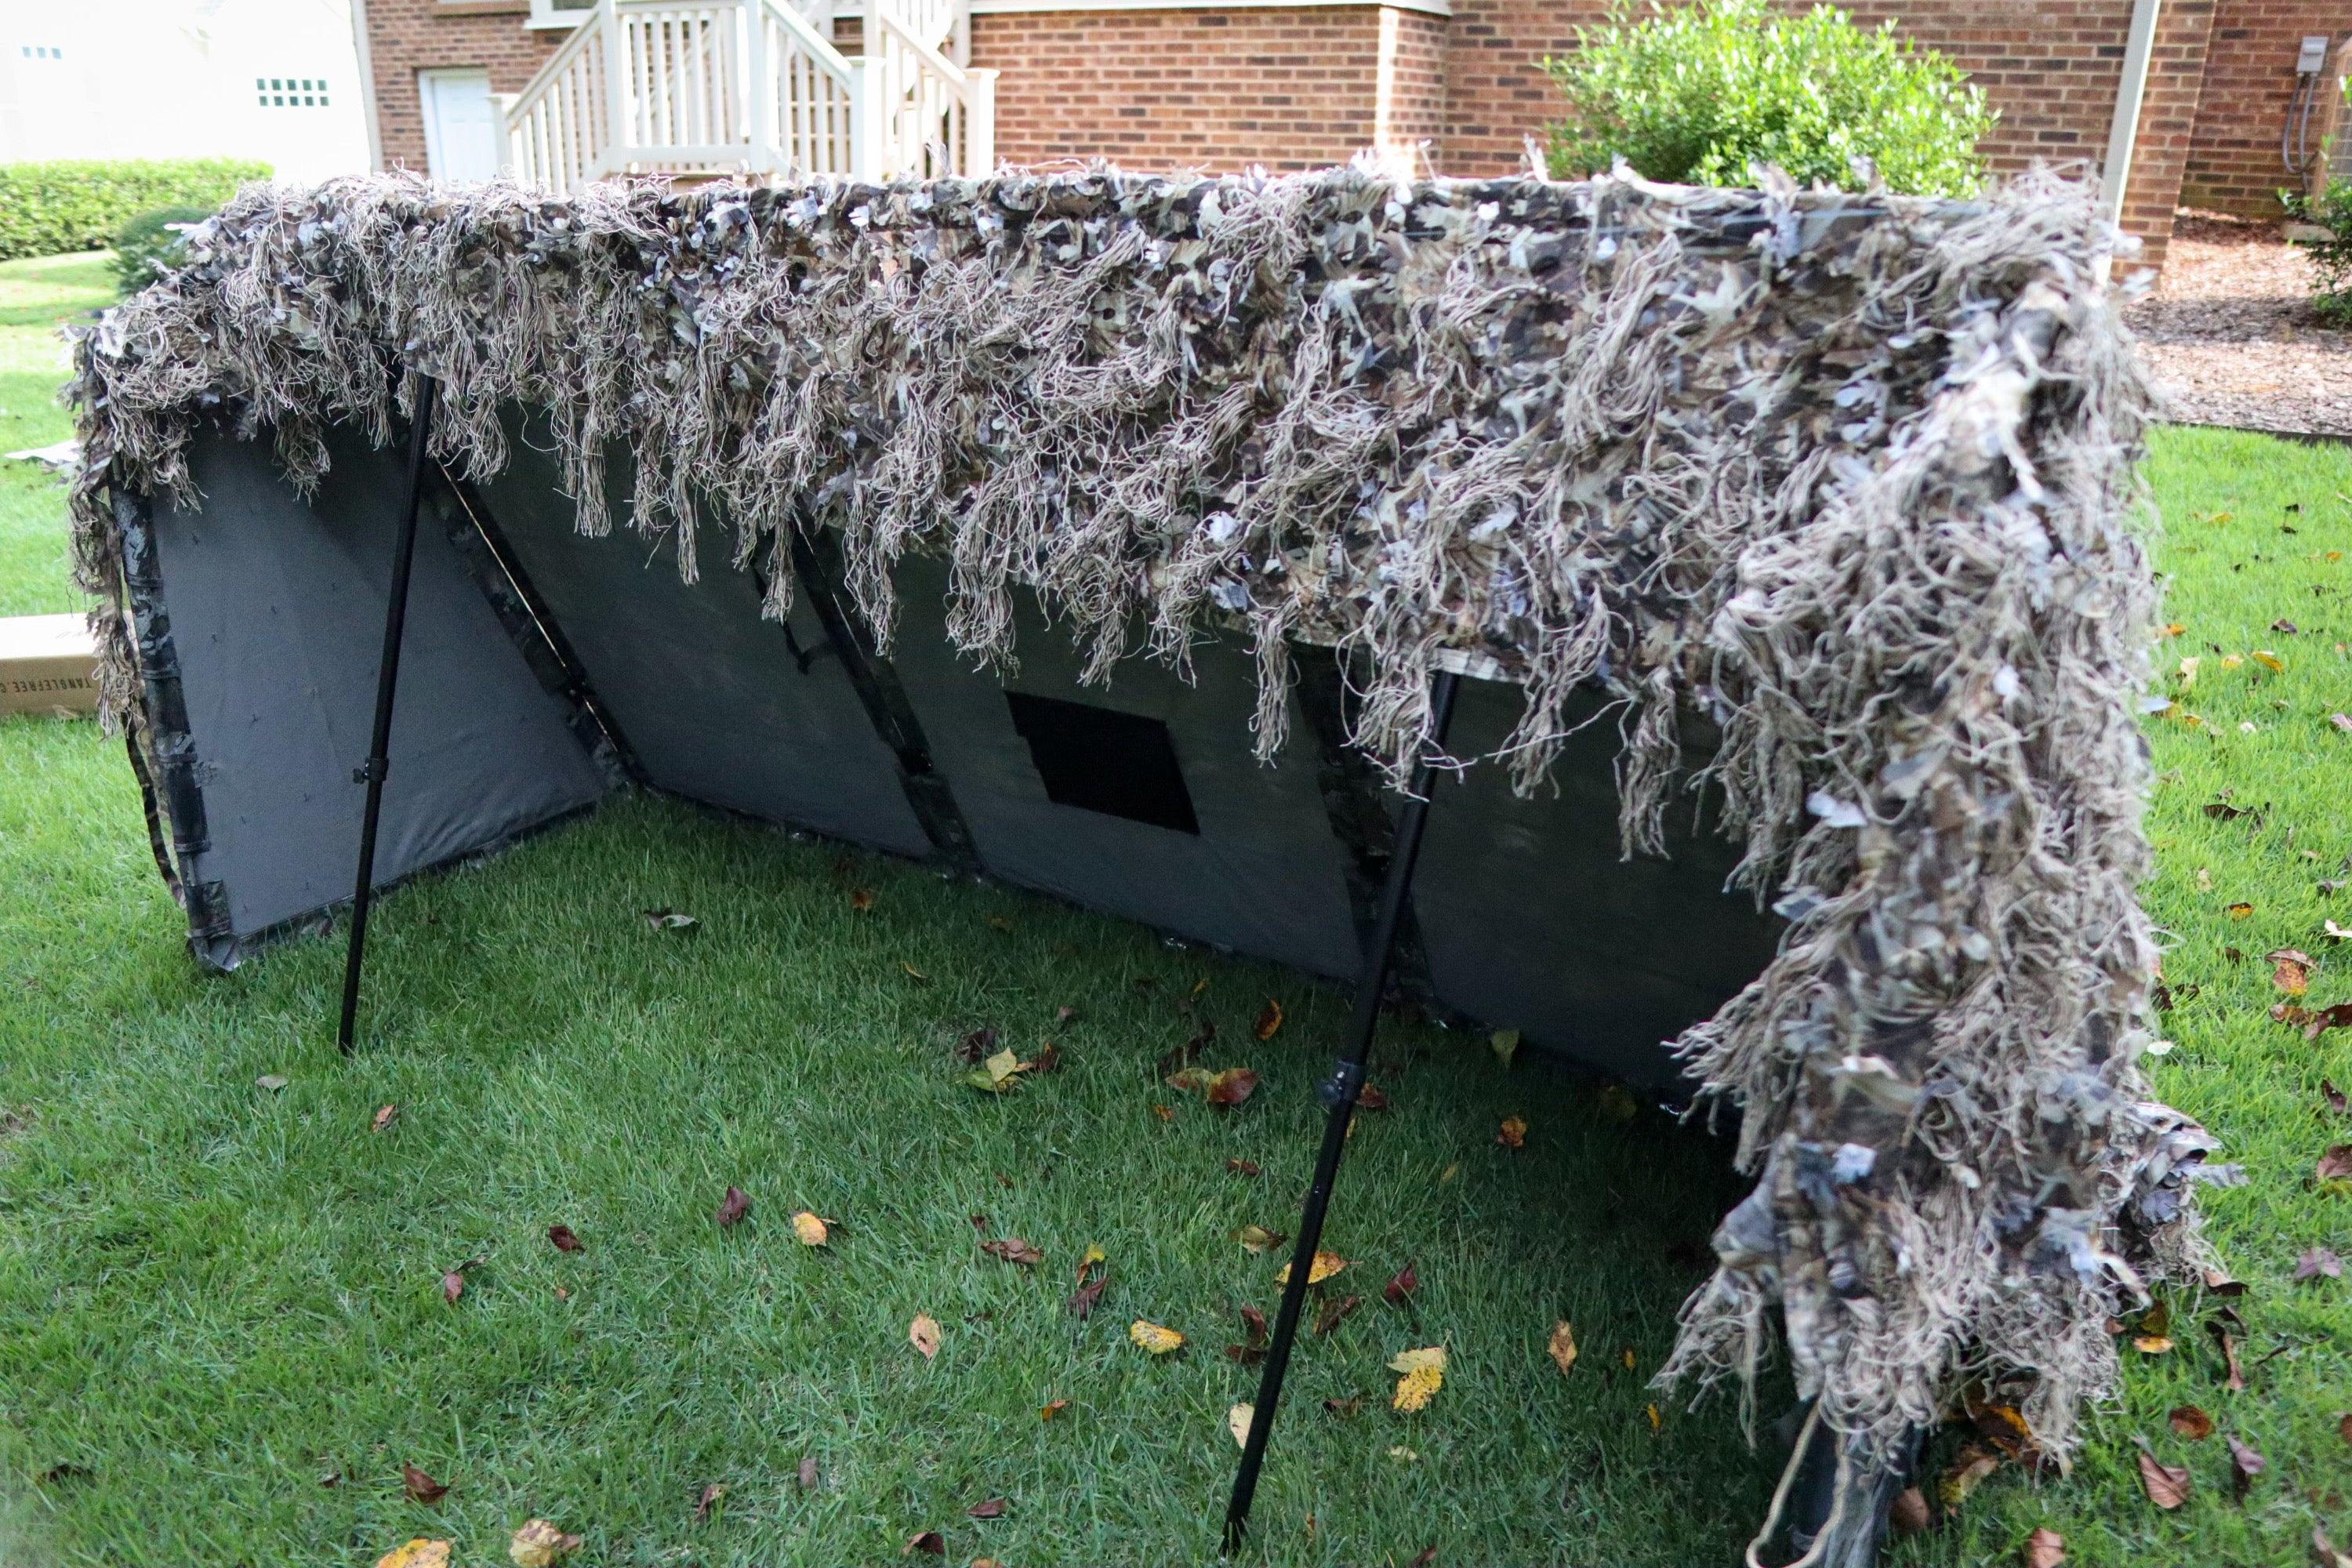 Wetland Grass Camouflage Ghillie Netting by North Mountain Gear 6 ft x 4.5 ft